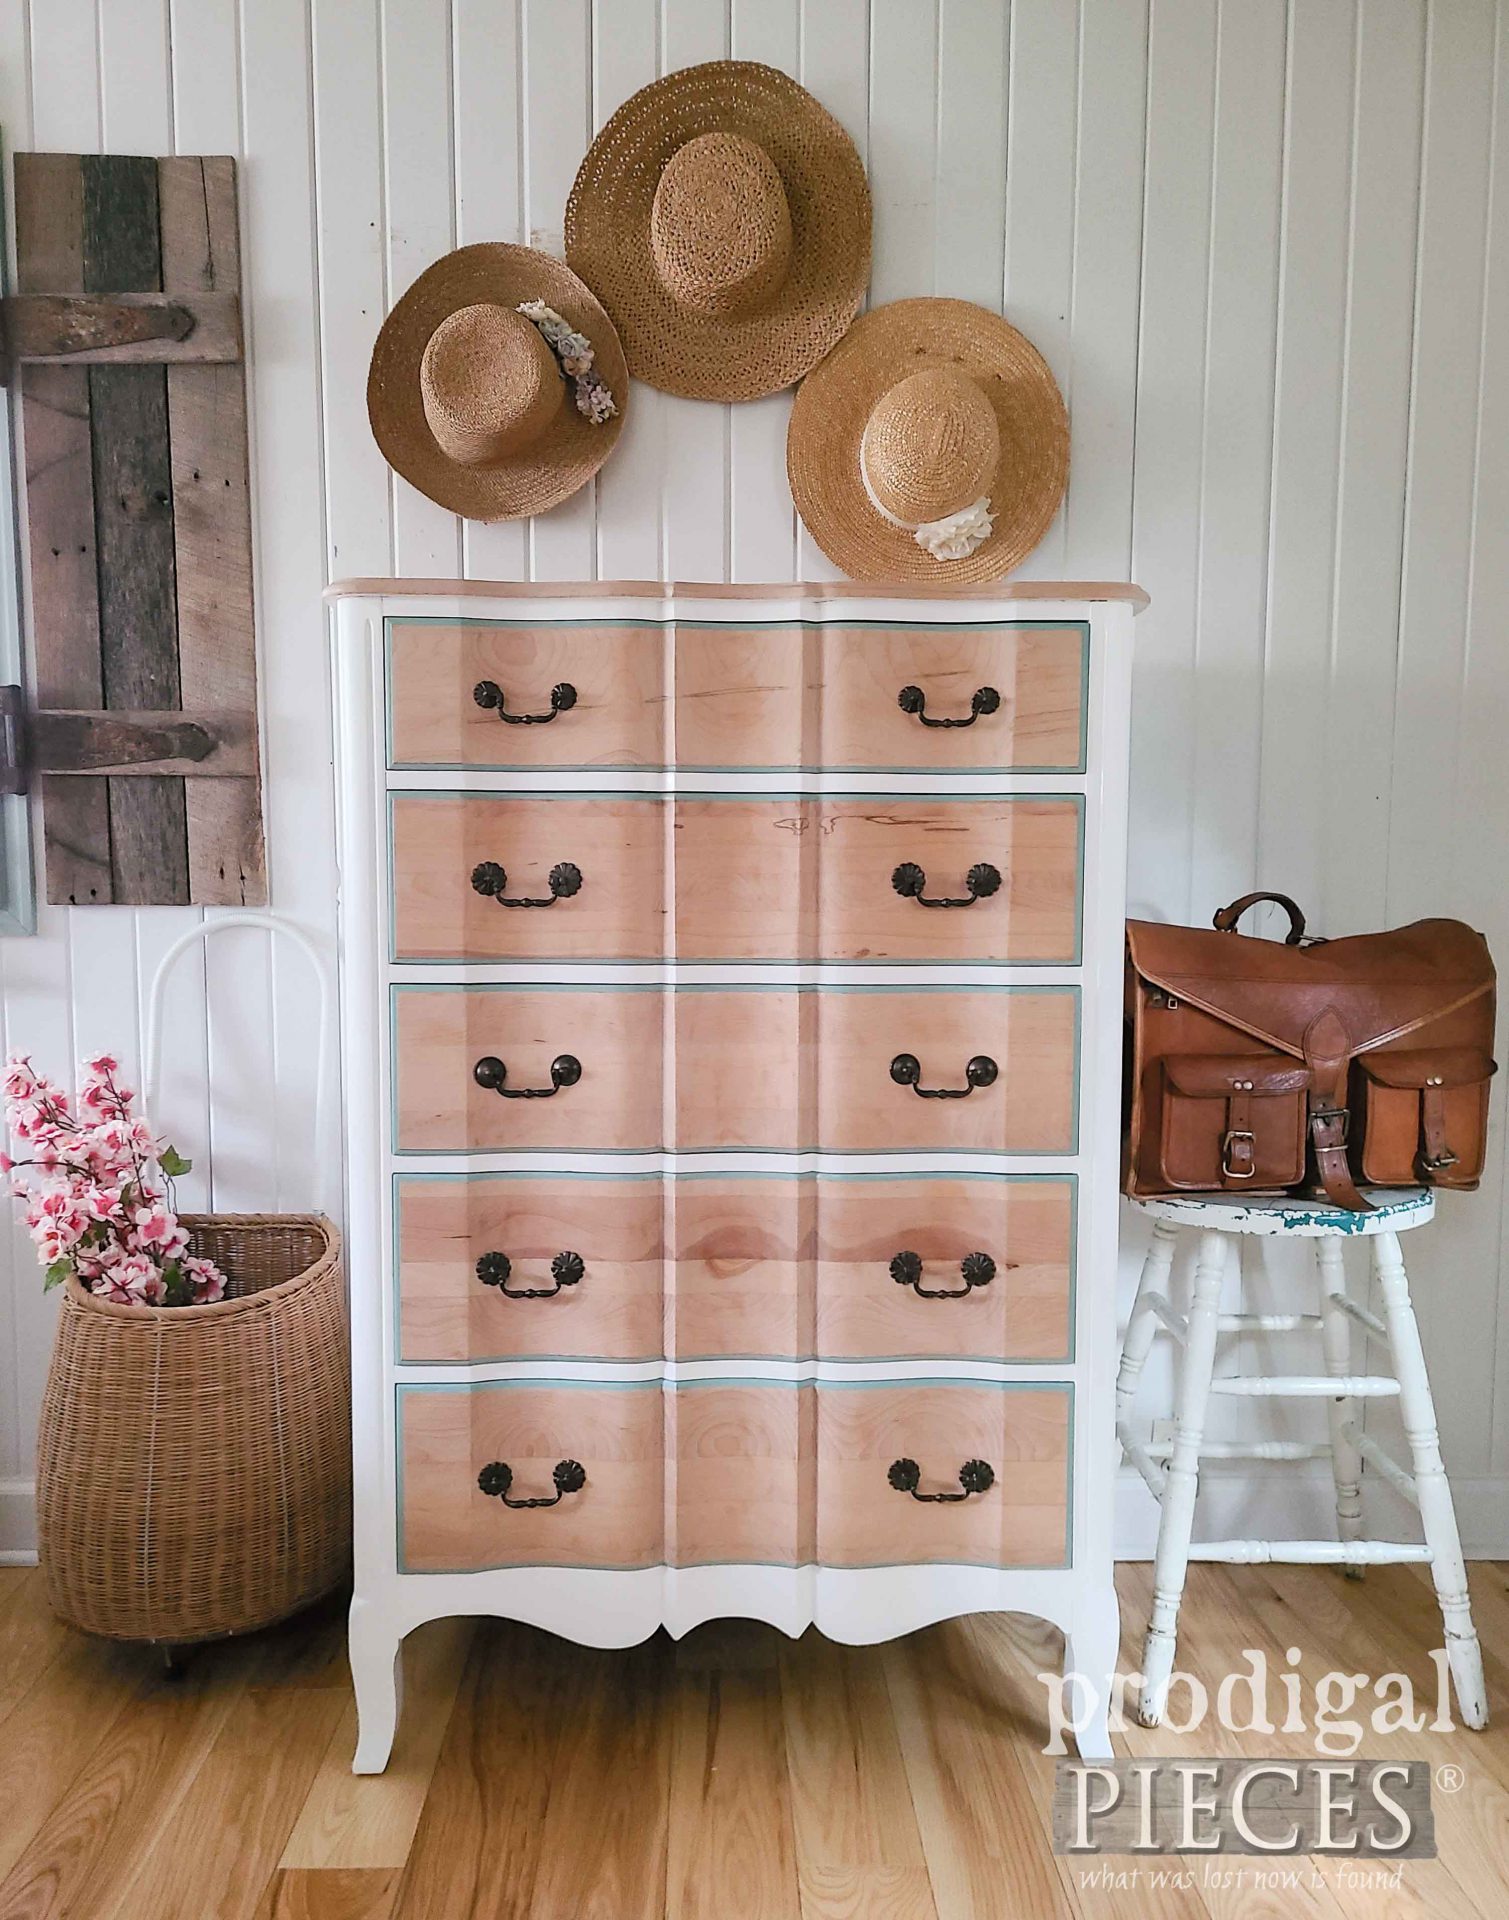 Vintage Chest of Drawers Refinished into a Modern Style by Larissa of Prodigal Pieces | prodigalpieces.com #prodigalpieces #furniture #diy #vintage